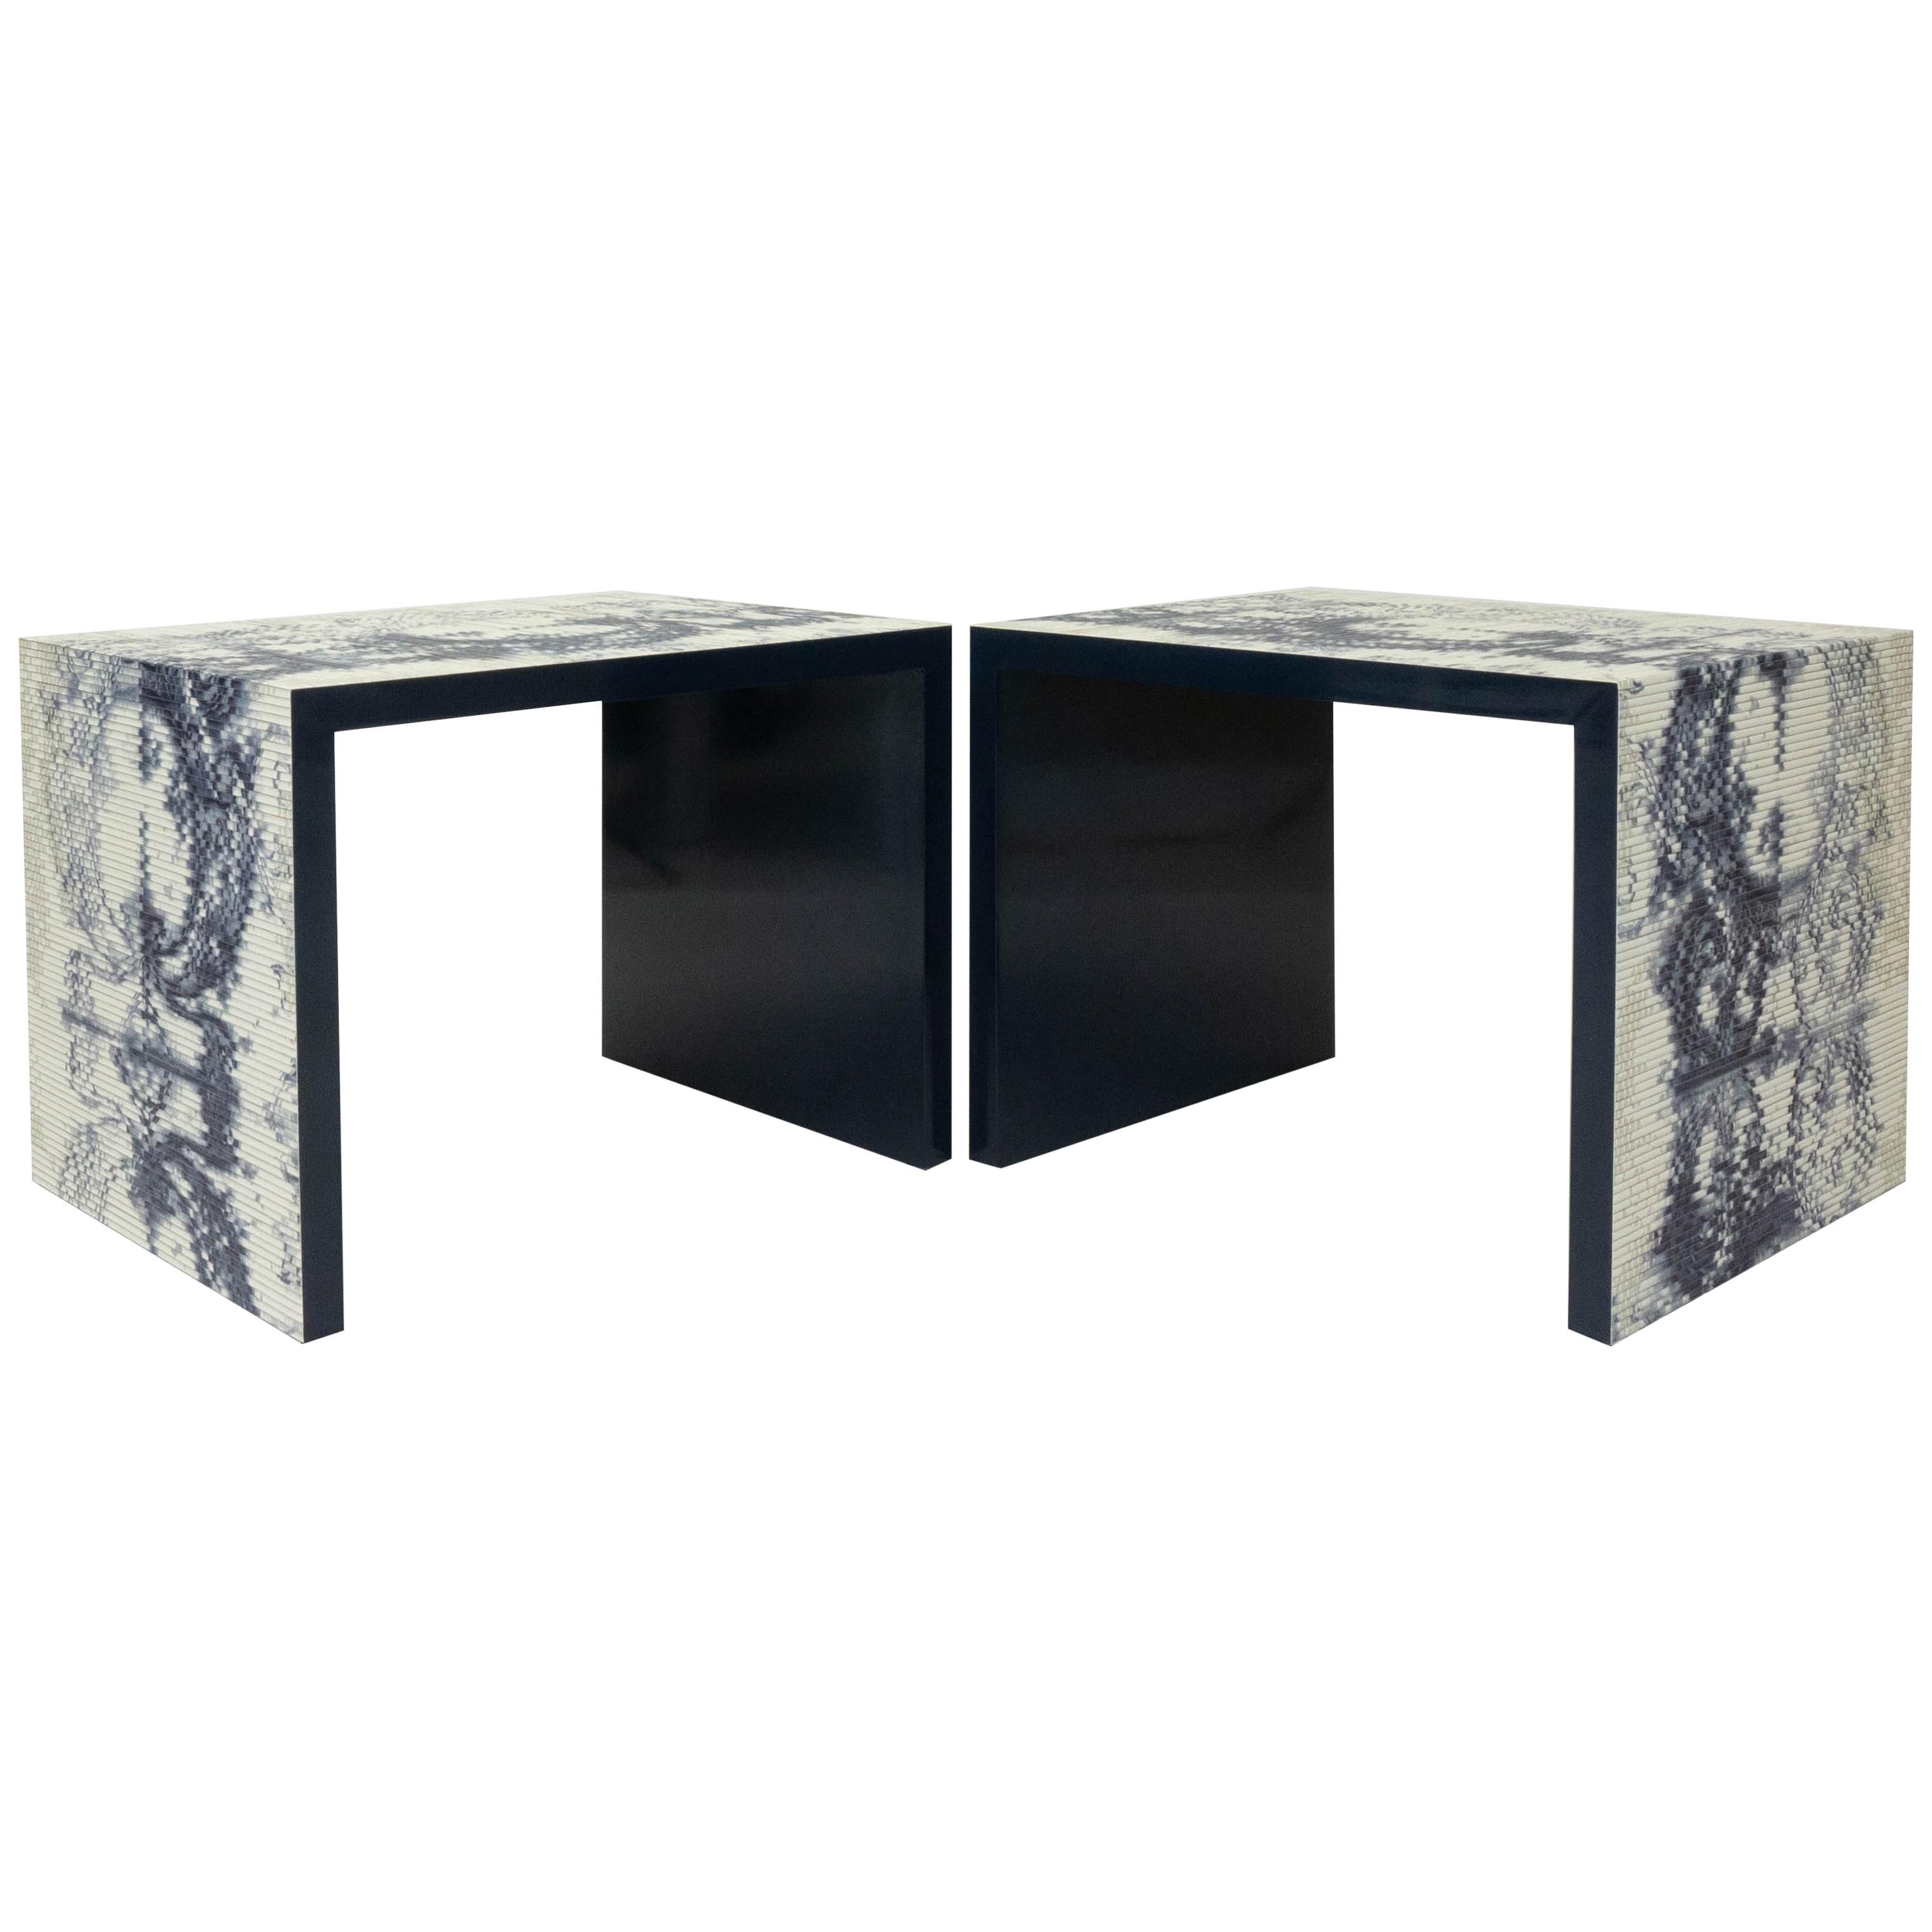 Modern Square Side Tables with Textured Print Finish